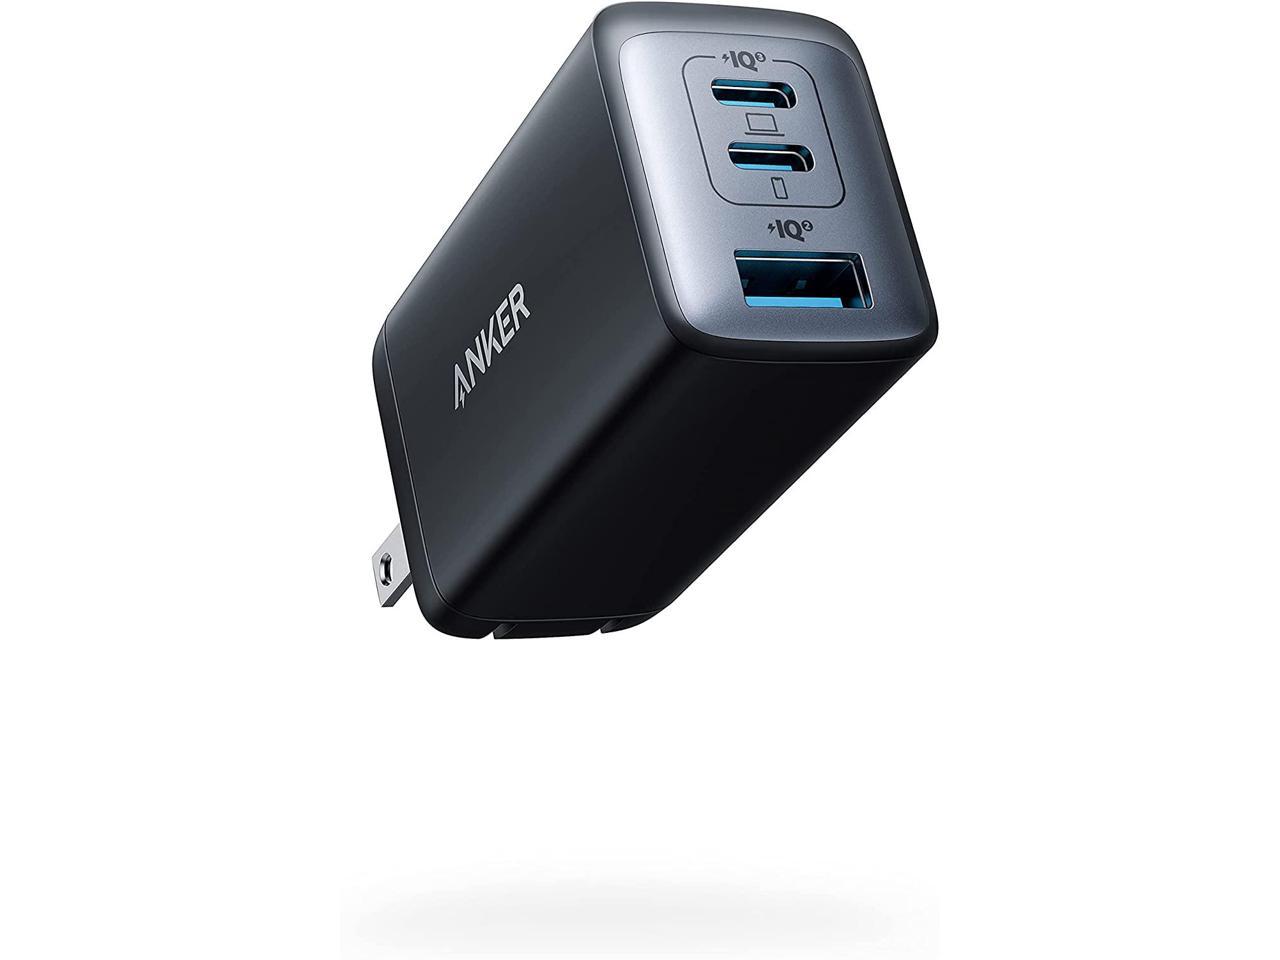 Anker 735 Charger (Nano II 65W), PPS 3-Port Fast Compact Foldable Wall Charger $44